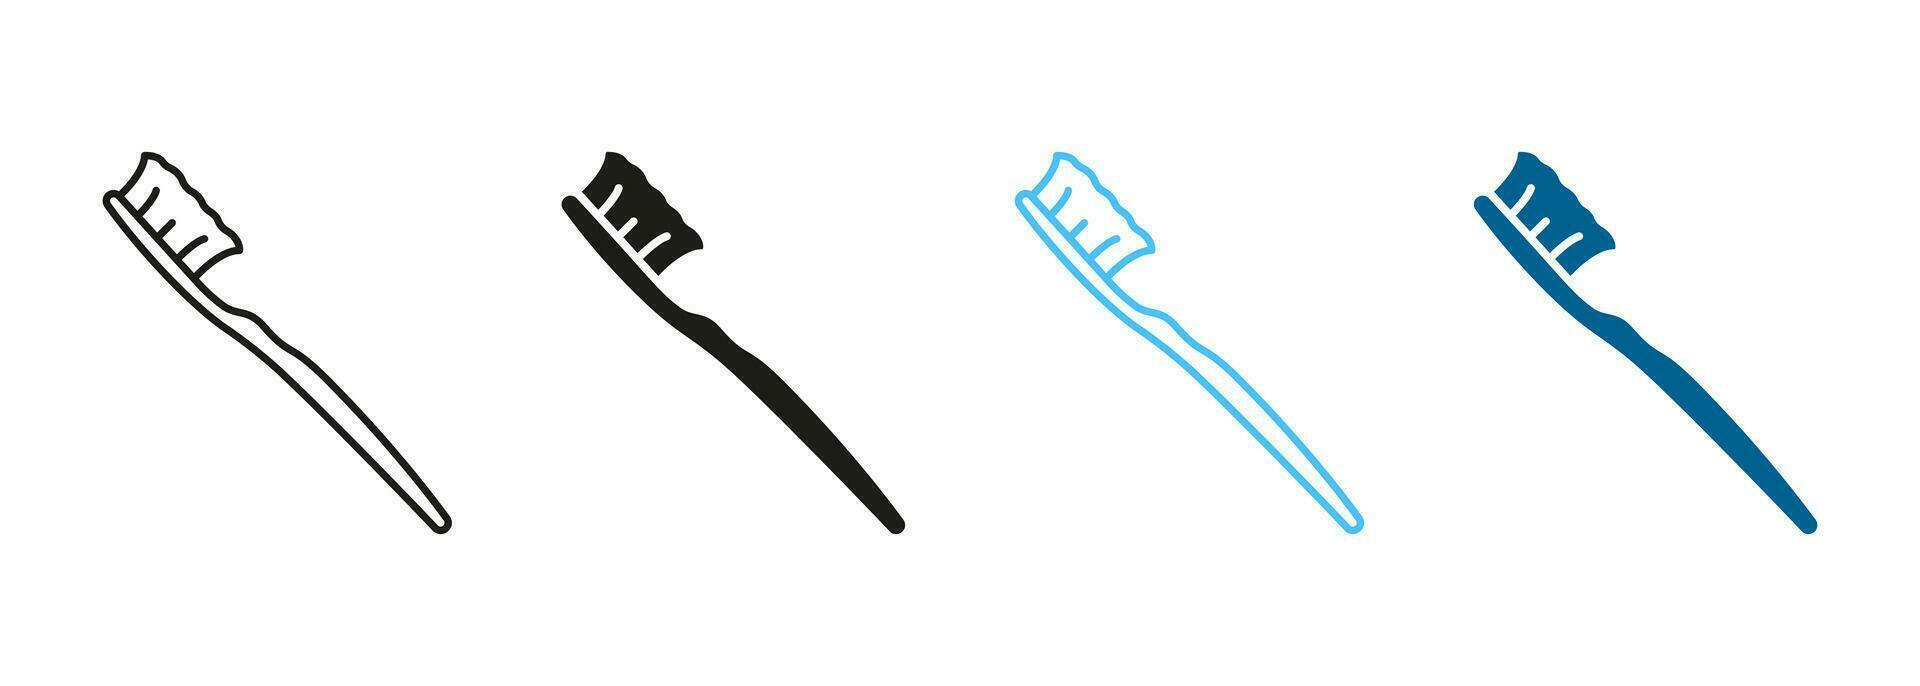 Toothbrush Silhouette and Line Icon Set. Tooth Care Equipment Color and Black Pictogram. Oral Hygienic and Health Tool Sign. Dental Daily Hygiene Accessory Symbol. Isolated Vector Illustration.